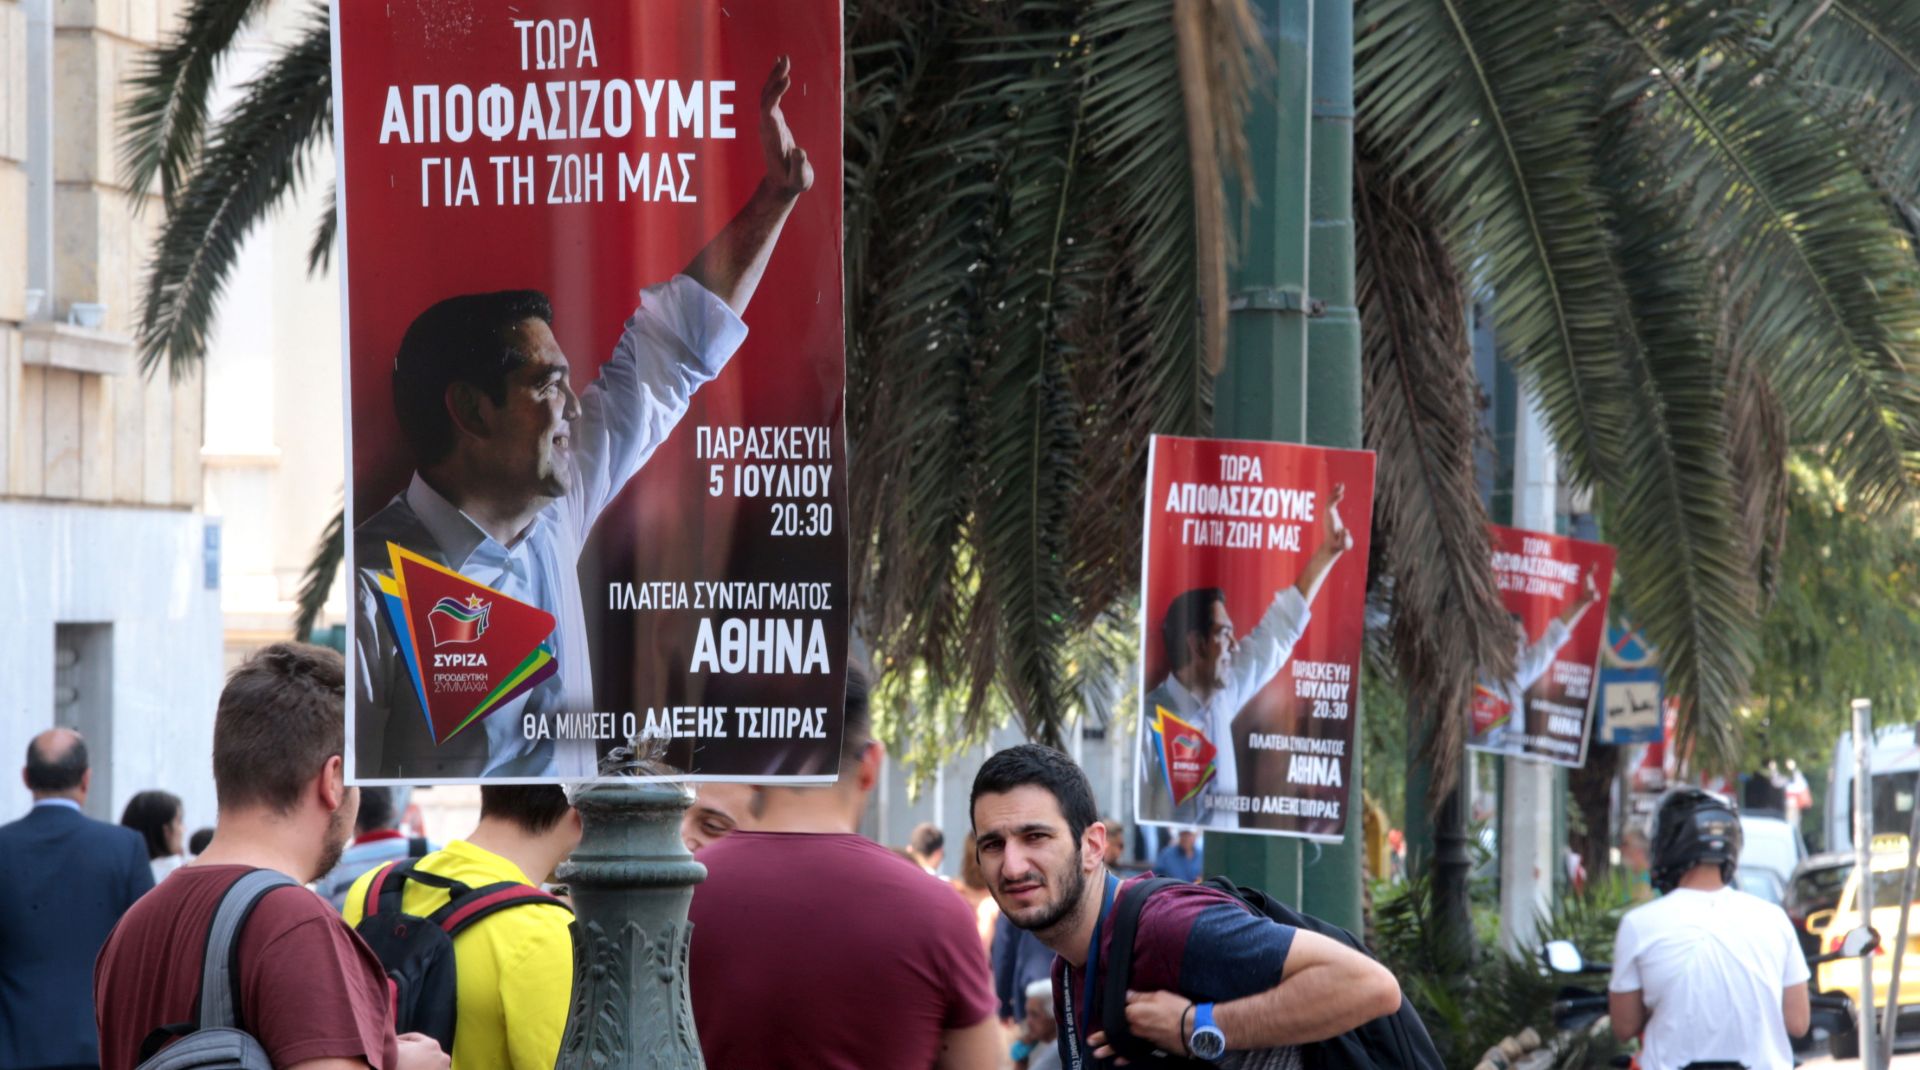 epa07697121 Pre-election posters of SYRIZA party are seen on a street in central Athens, Greece, 05 July 2019. General elections in Greece are scheduled on 07 July 2019. EPA/PANTELIS SAITAS  EPA-EFE/PANTELIS SAITAS